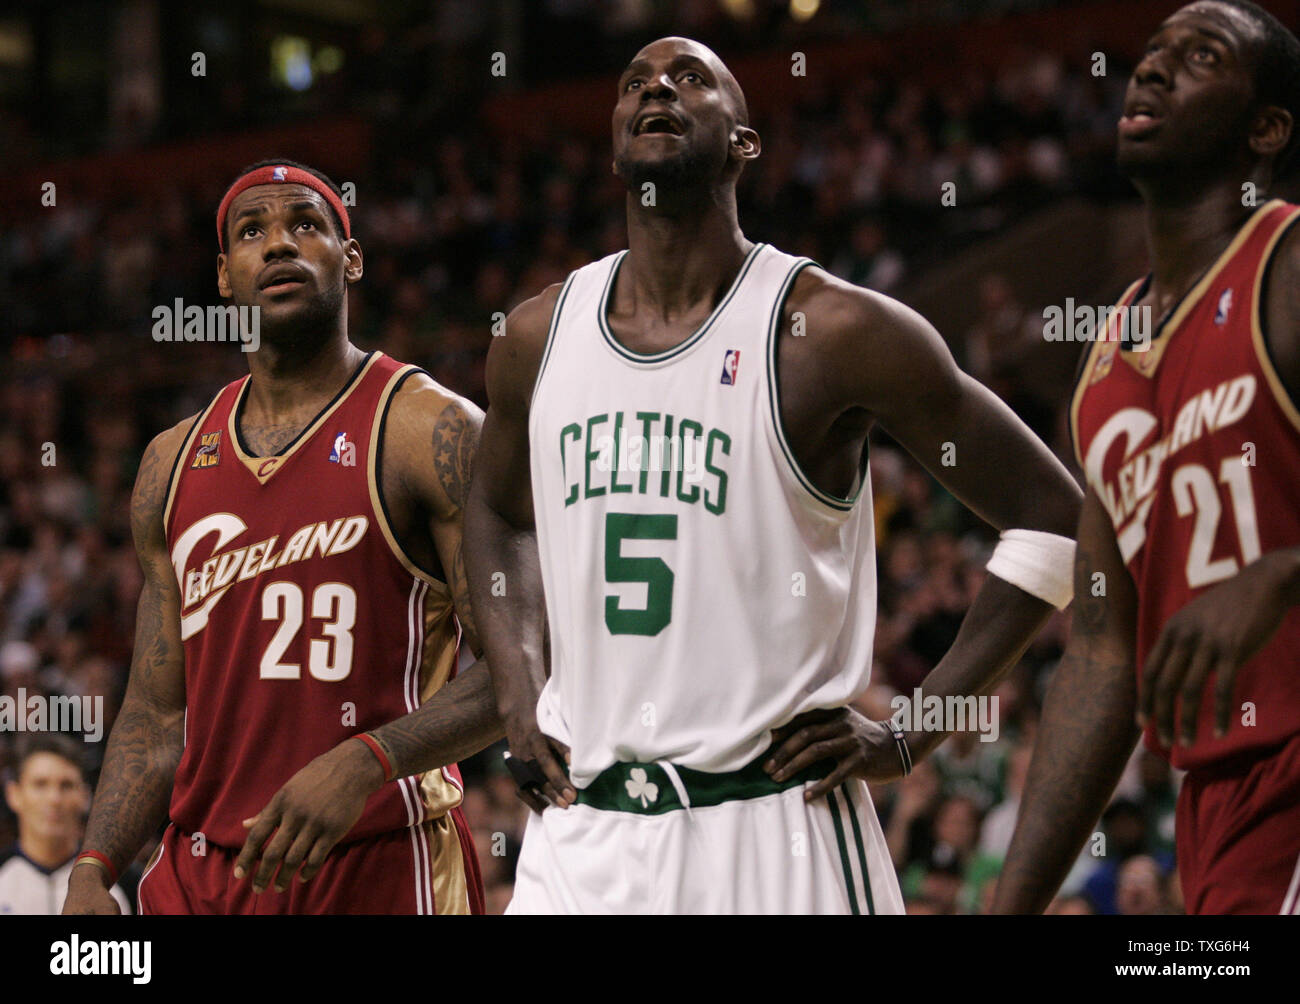 Cleveland Cavaliers forward LeBron James (23), Boston Celtics forward Kevin Garnett (5) and Cavaliers forward J.J. Hickson (21) watch a Celtics free throw in the second half at the TD Garden in Boston, Massachusetts on February 25, 2010.  The Cavaliers defeated the Celtics 108-88.   UPI/Matthew Healey Stock Photo